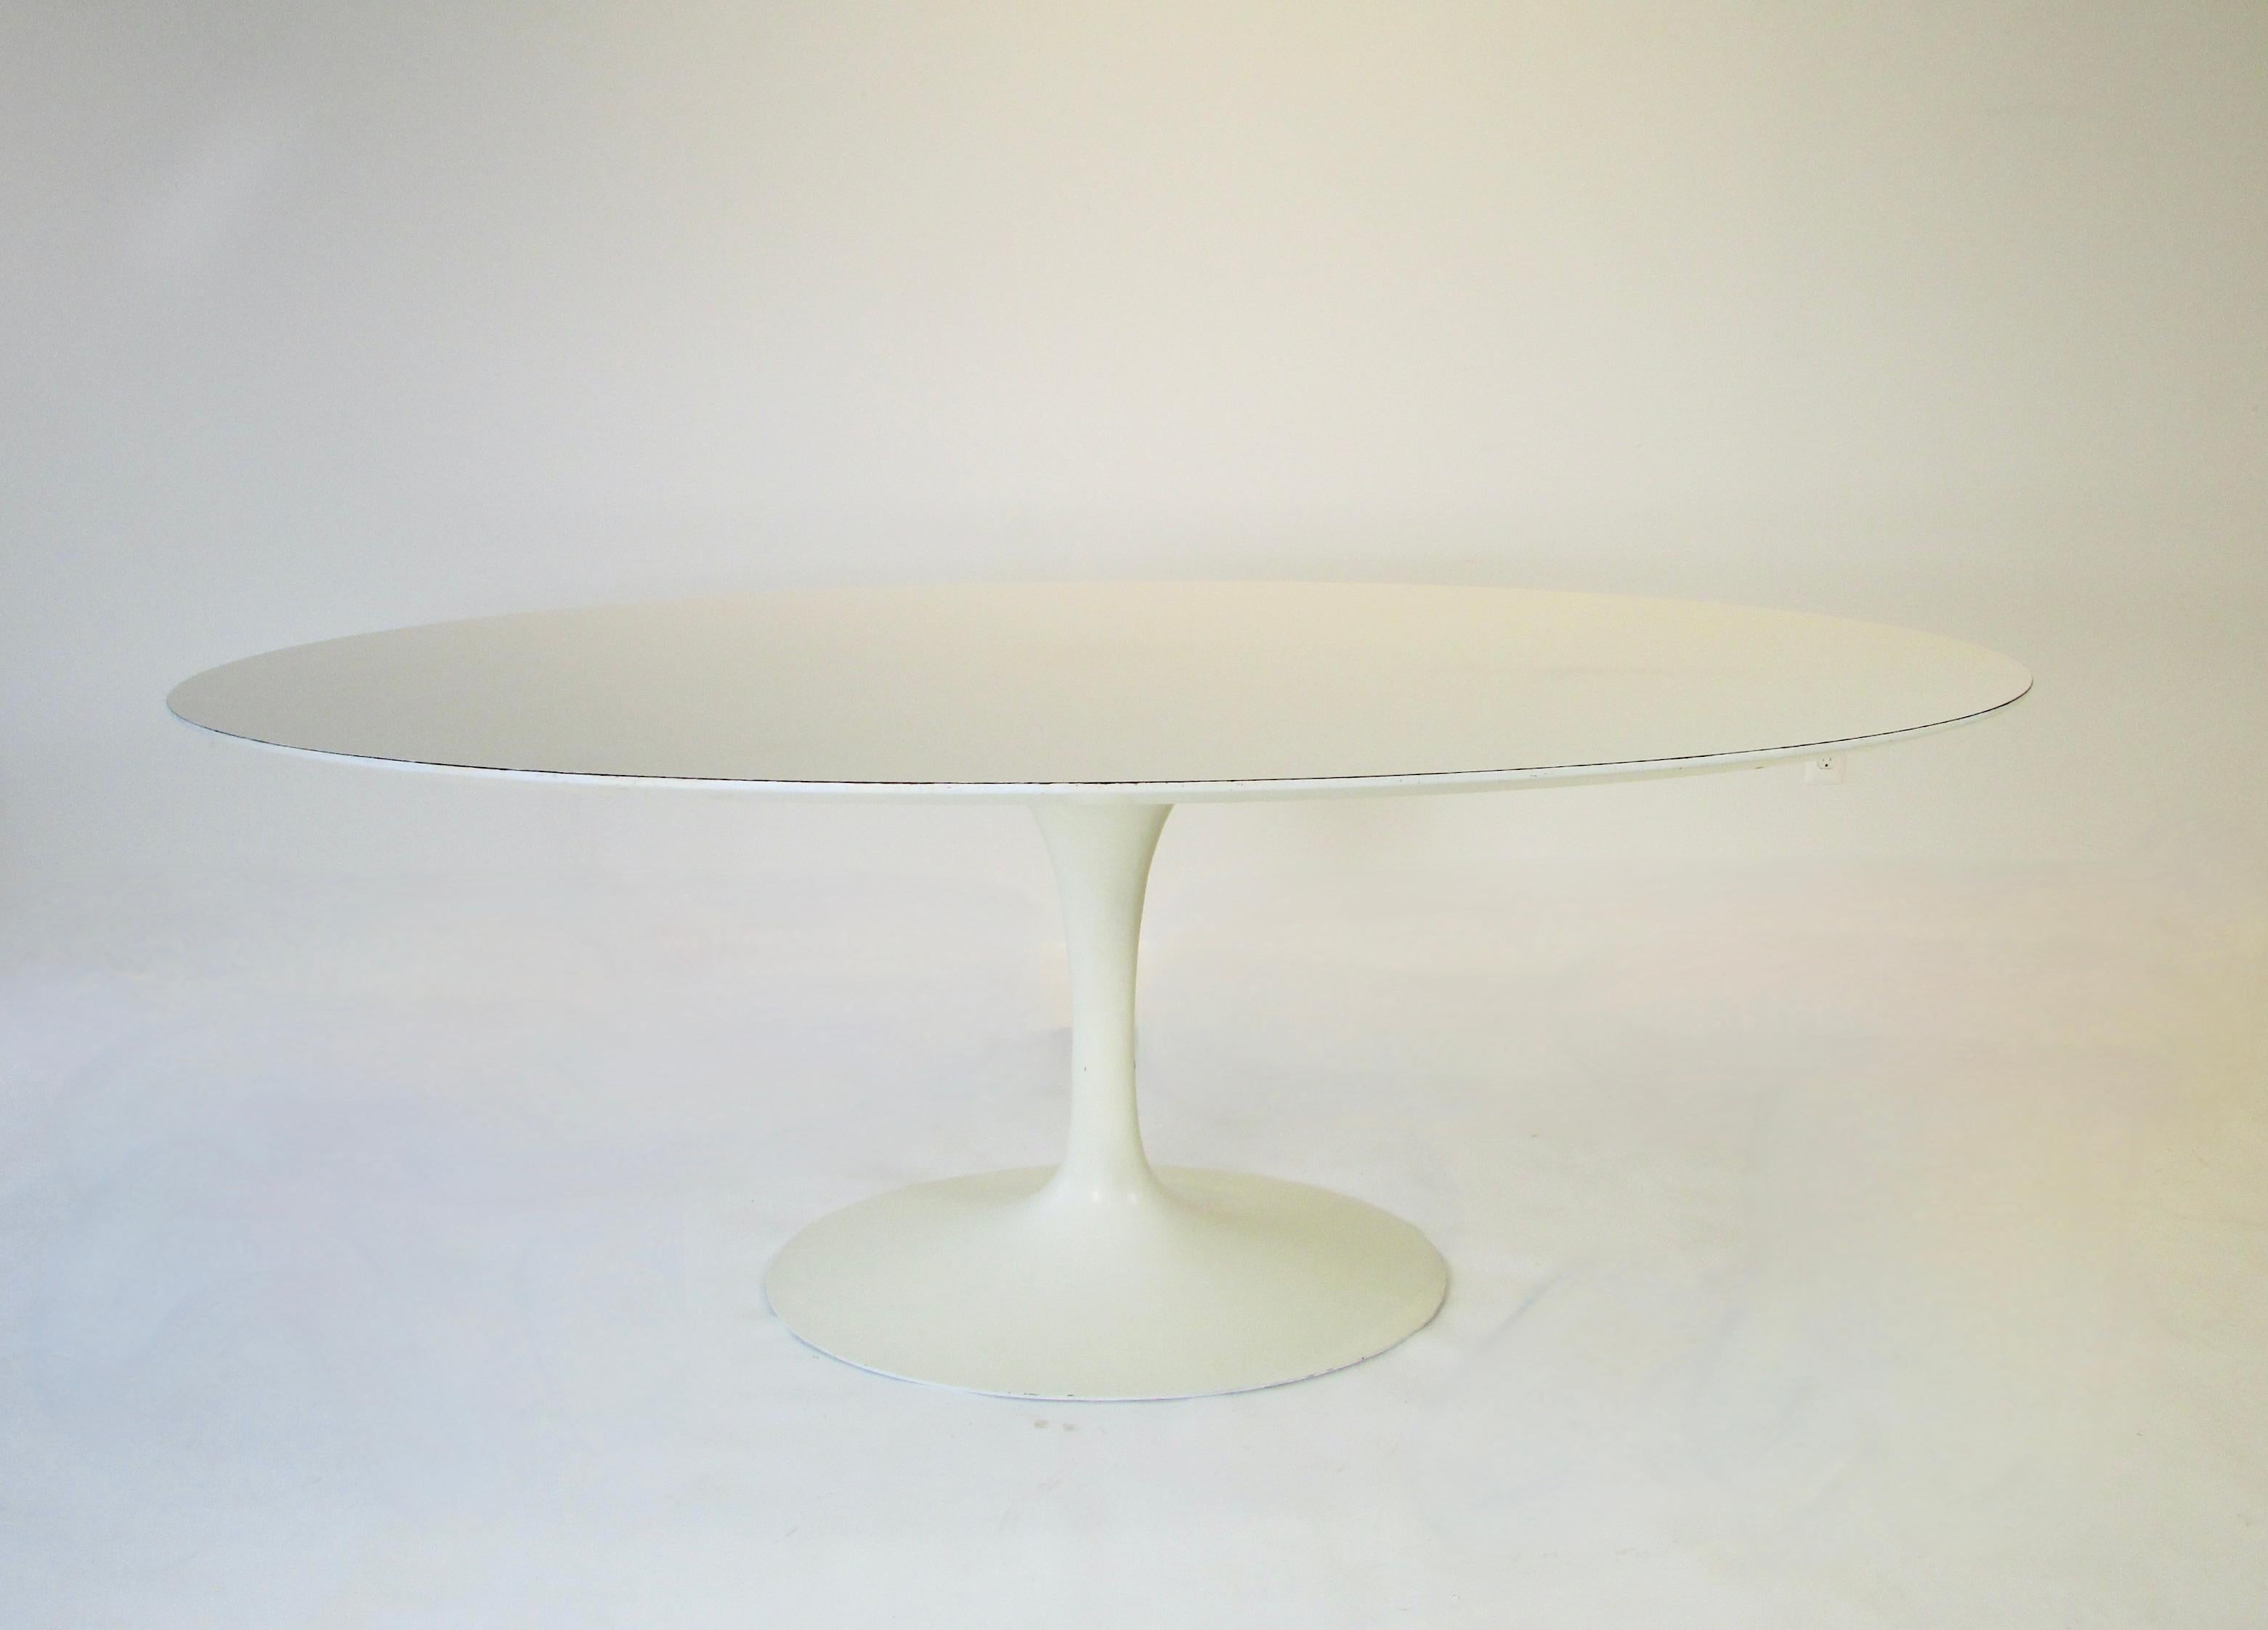 Earlier production Eero Saarinen Knoll cast iron base Tulip group dining table. White laminate top on lacquered base. Retains original label on underside . No chips or cracks to laminate top . 